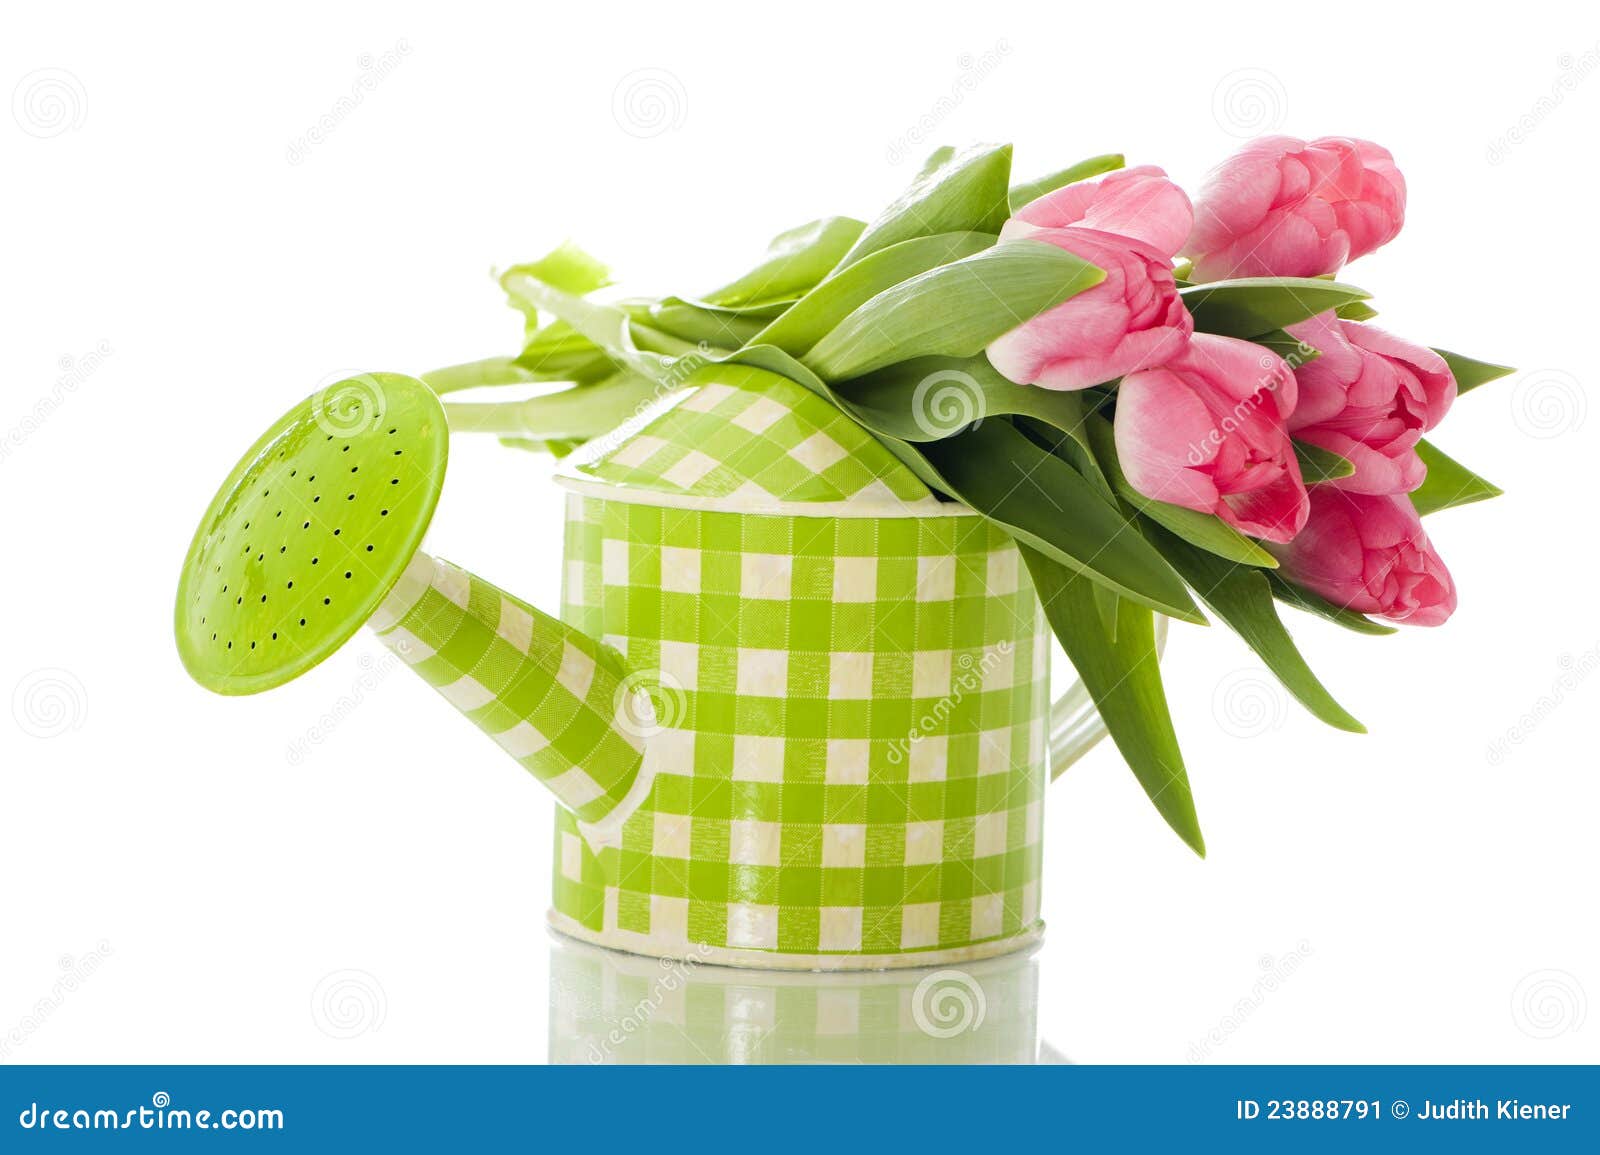 Watering can with tulips stock image. Image of lilac - 23888791